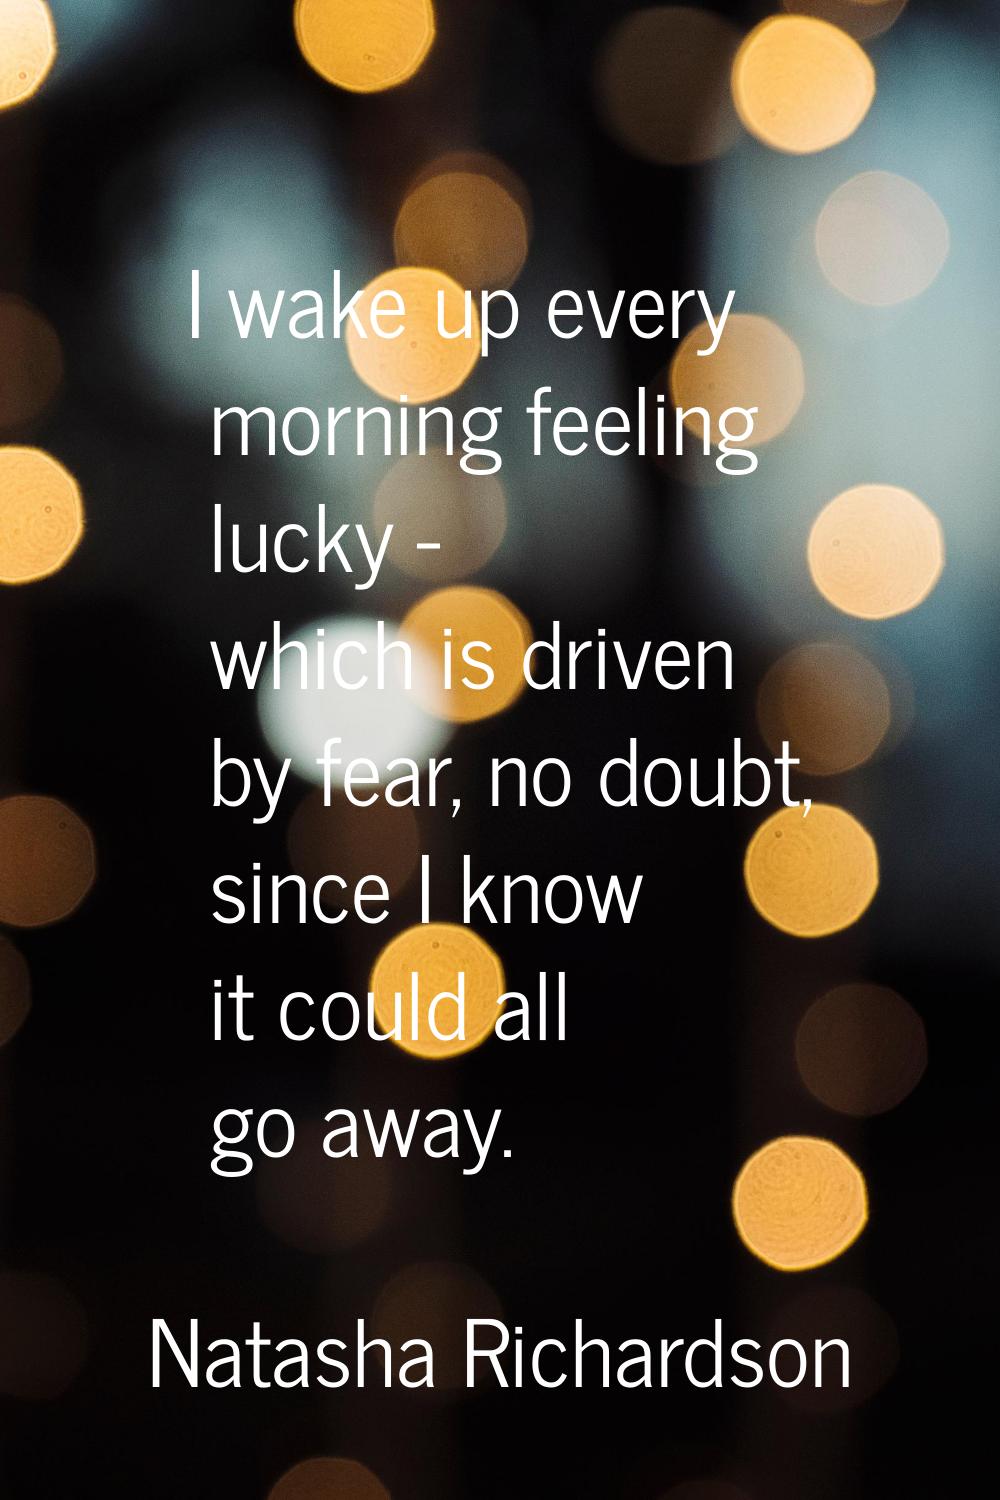 I wake up every morning feeling lucky - which is driven by fear, no doubt, since I know it could al